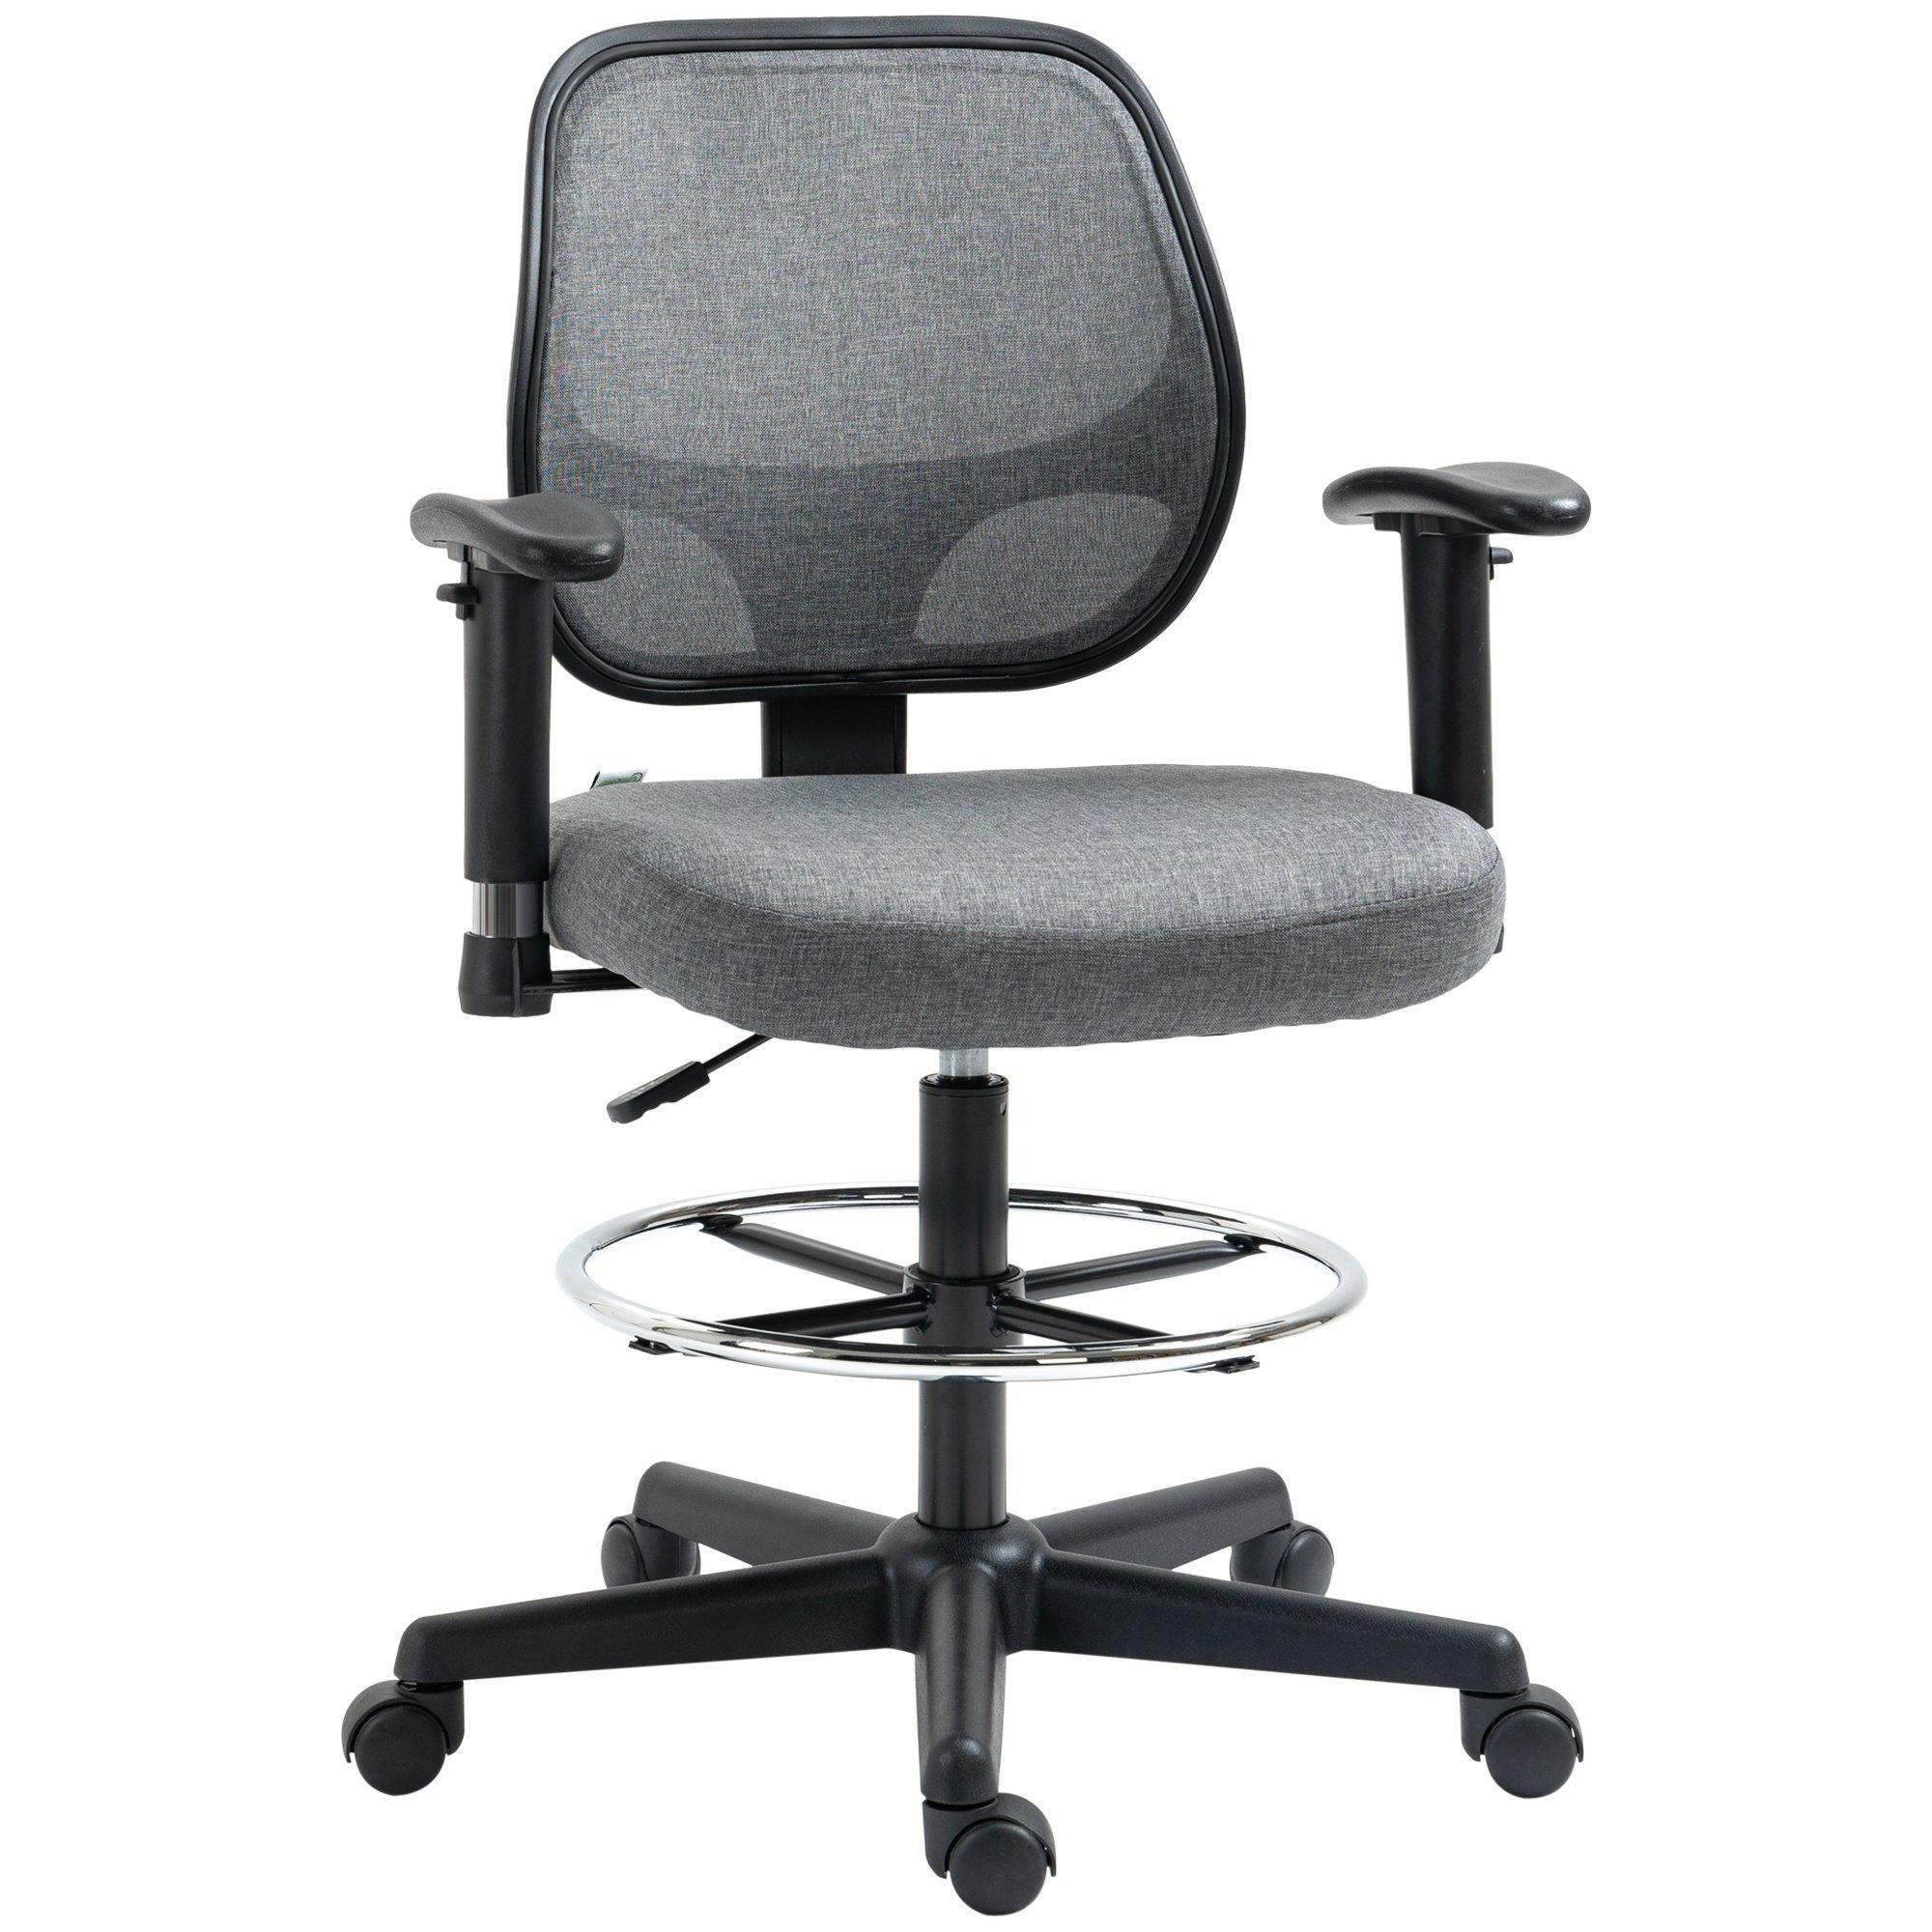 Ergonomic Drafting Chair Tall Office Stand Desk Chair with Foot Ring - image 1